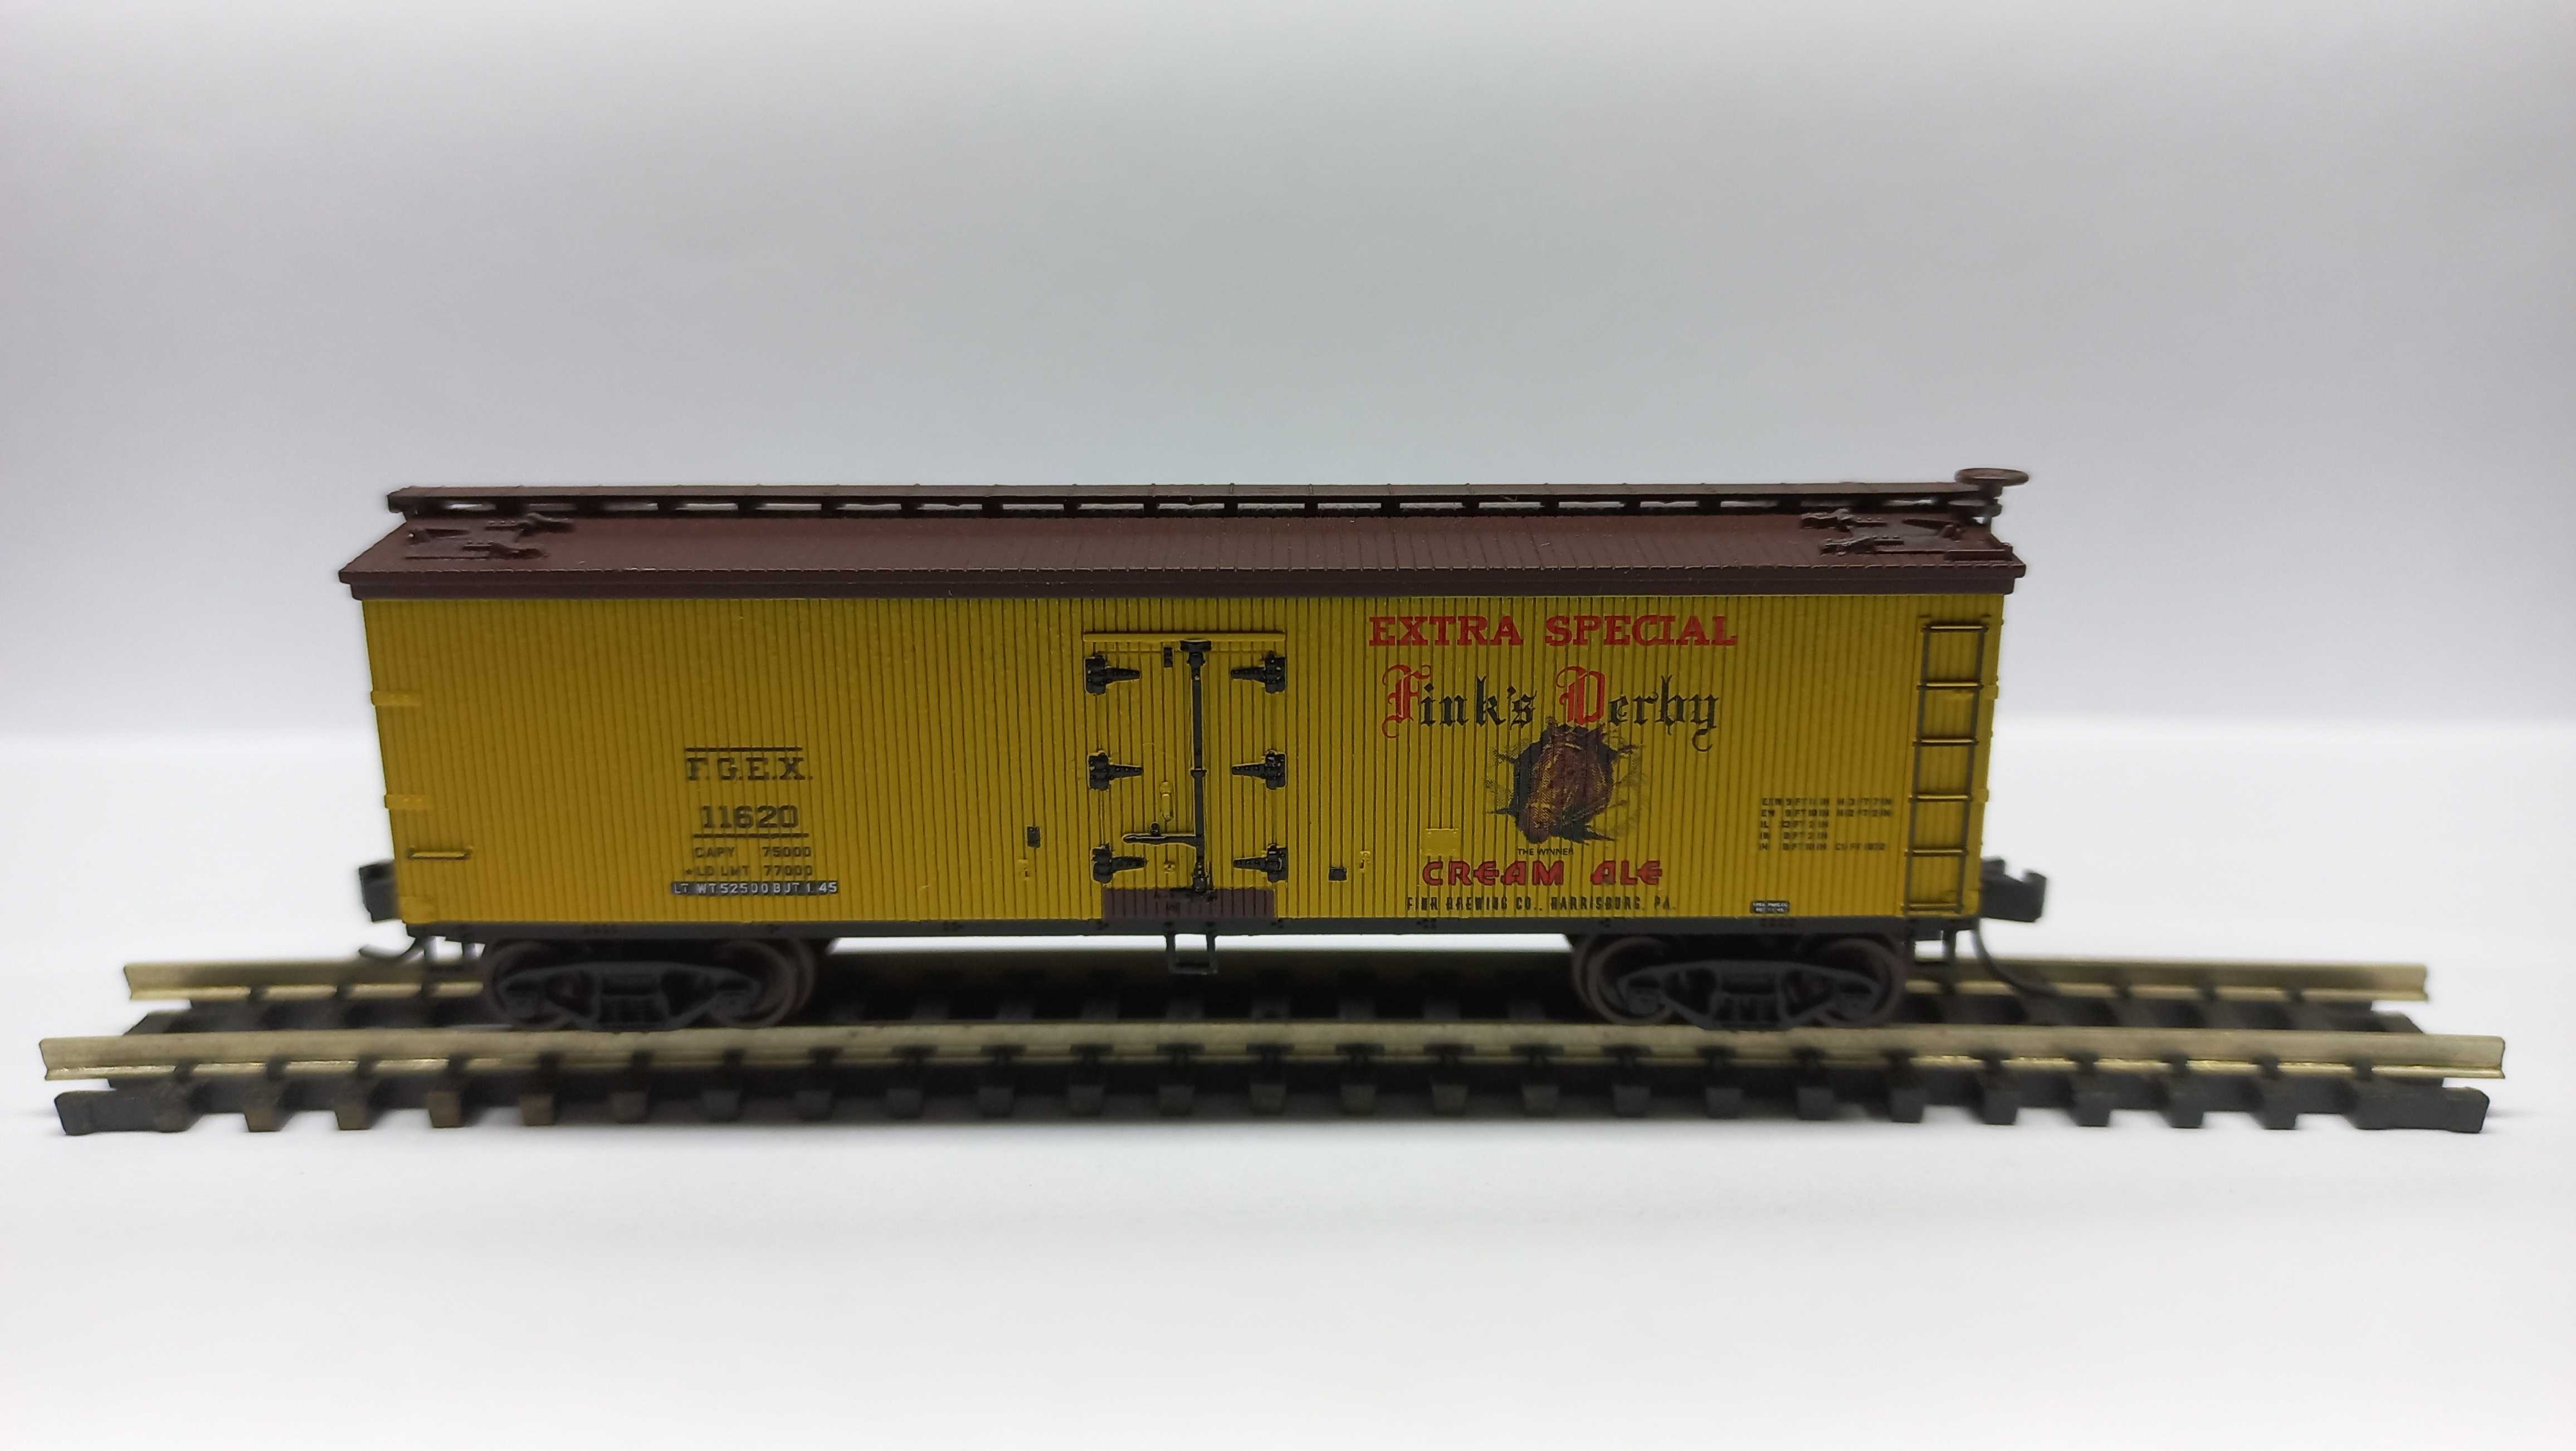 Atlas 11-08 Vagão 40' WOOD REEFER  ENTHUSIAST PENNSY  BEERS OF YORE FINK'S  DERBY EXTRA SPECFIAL # 11620 "N" 1:160